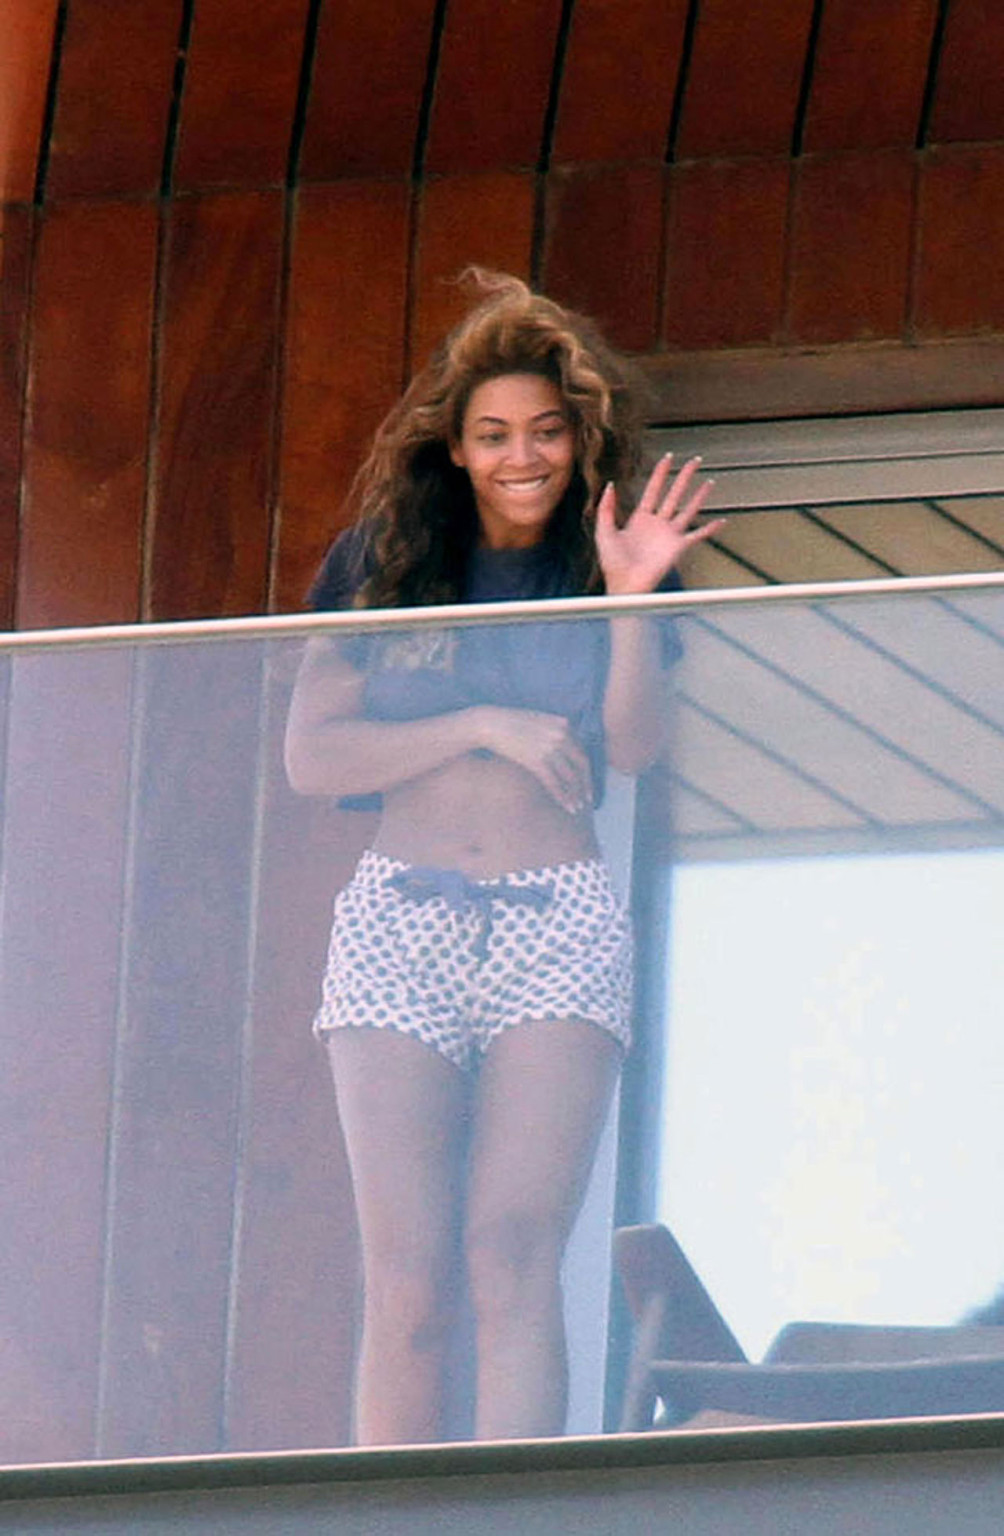 Beyonce Knowles showing her fantastic legs and body on stage #75360248